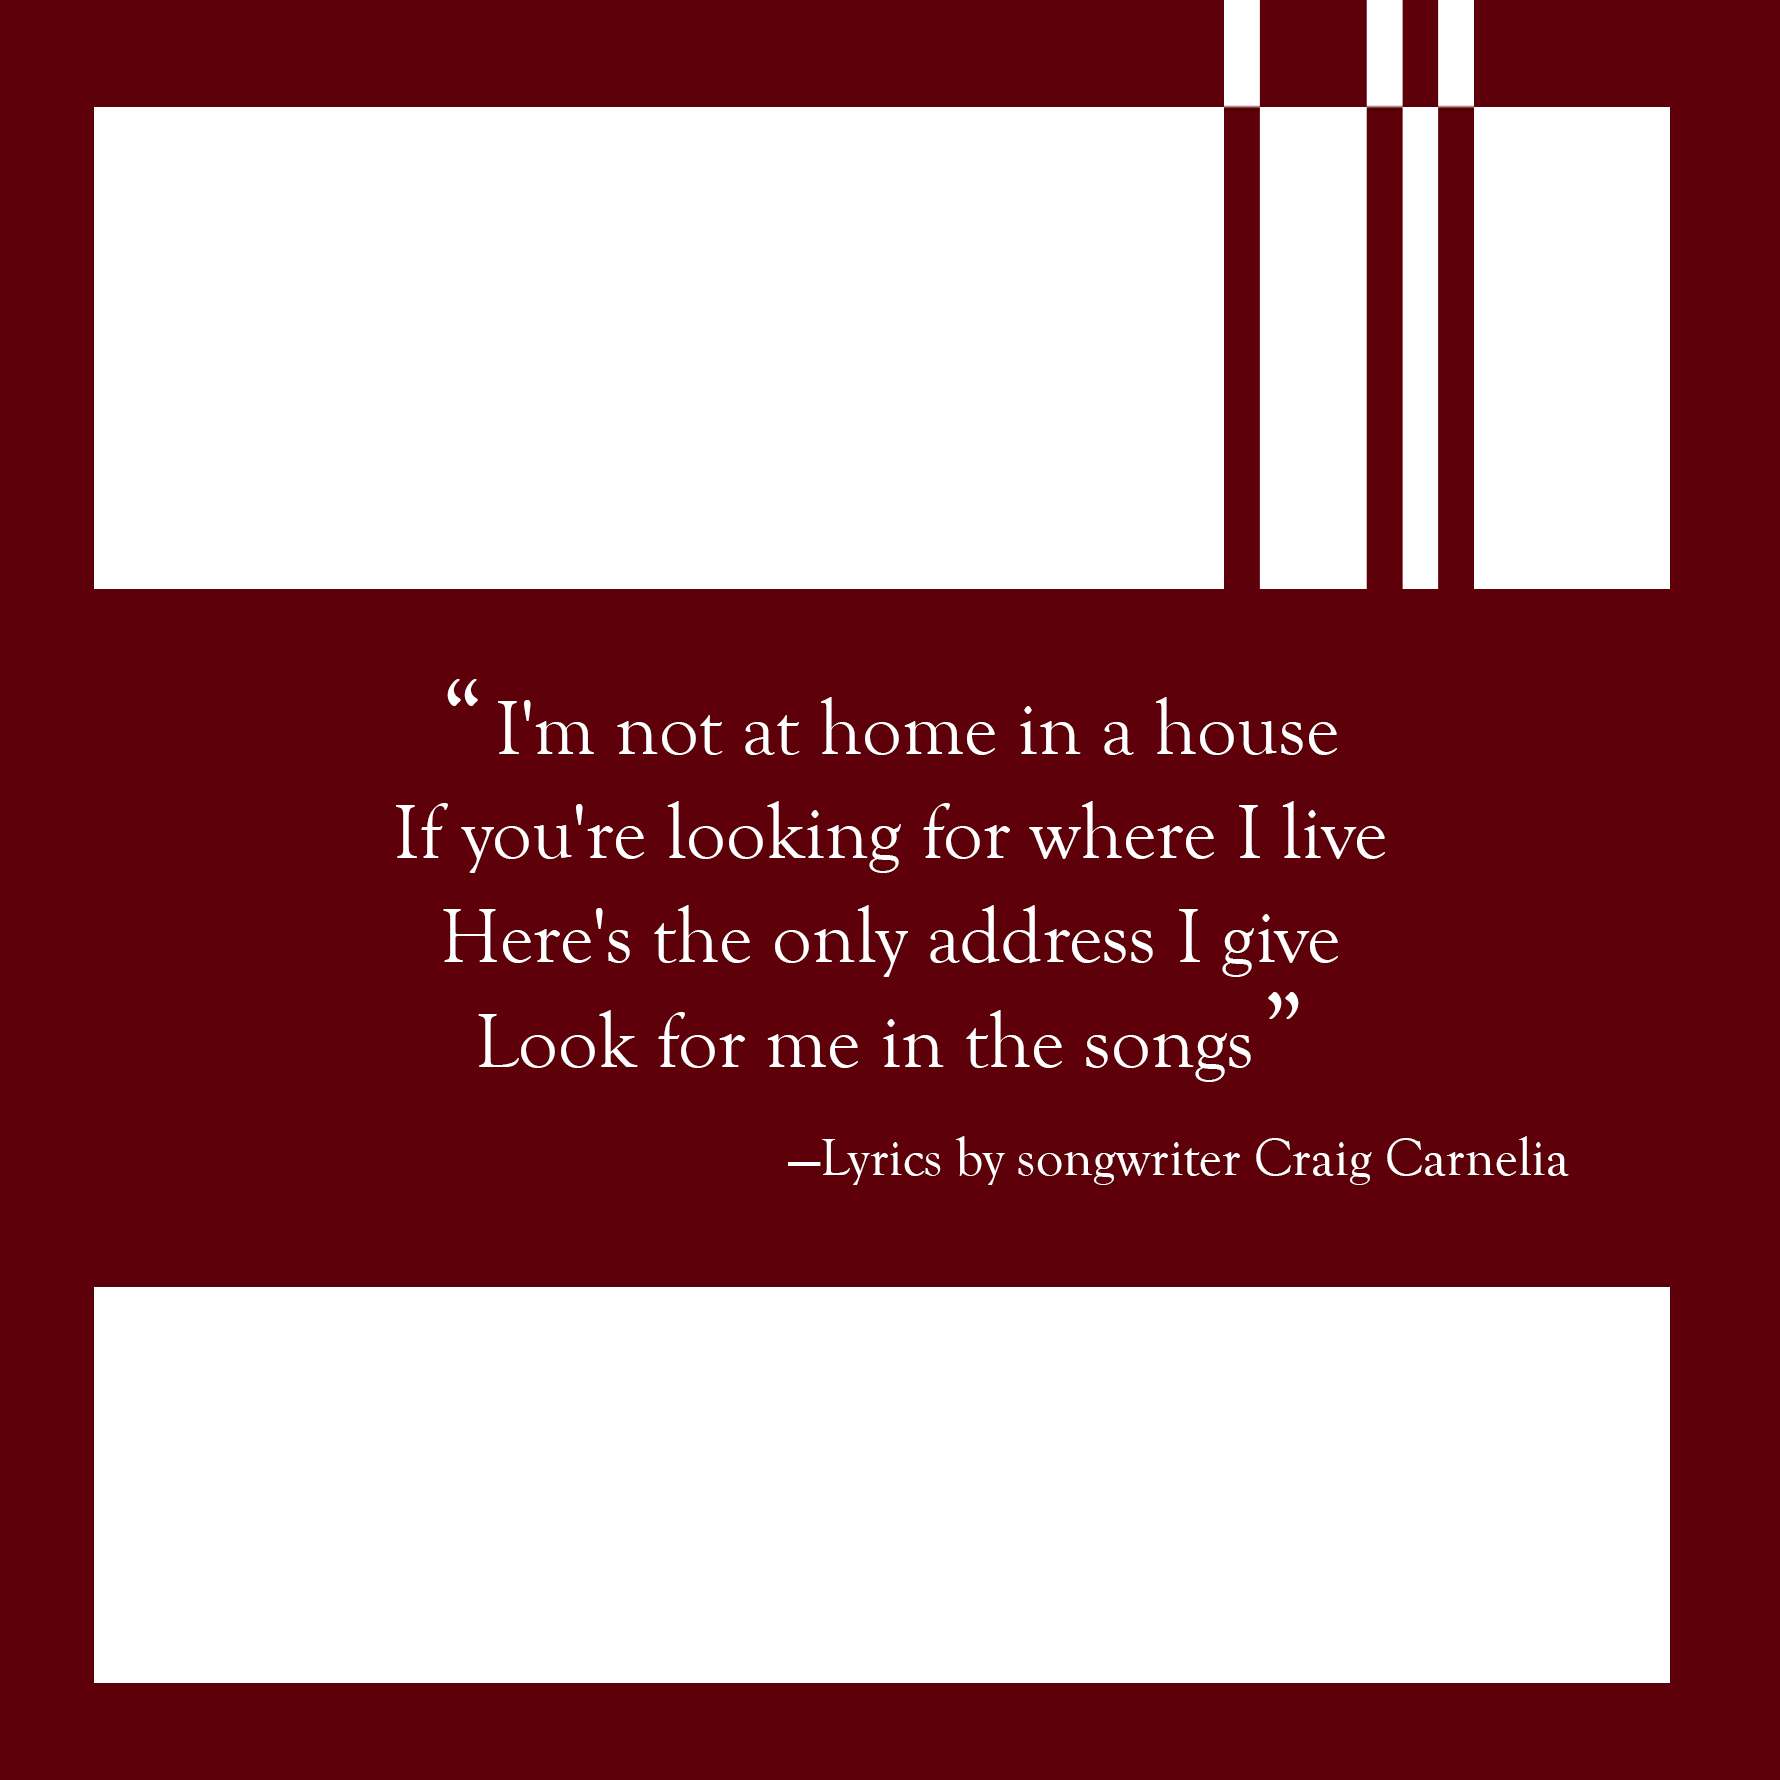 Lyrics by Craig Carnelia: "I'm not at home in a house/ If you're looking for where I live/ Here's the only address I give/ Look for me in the songs"